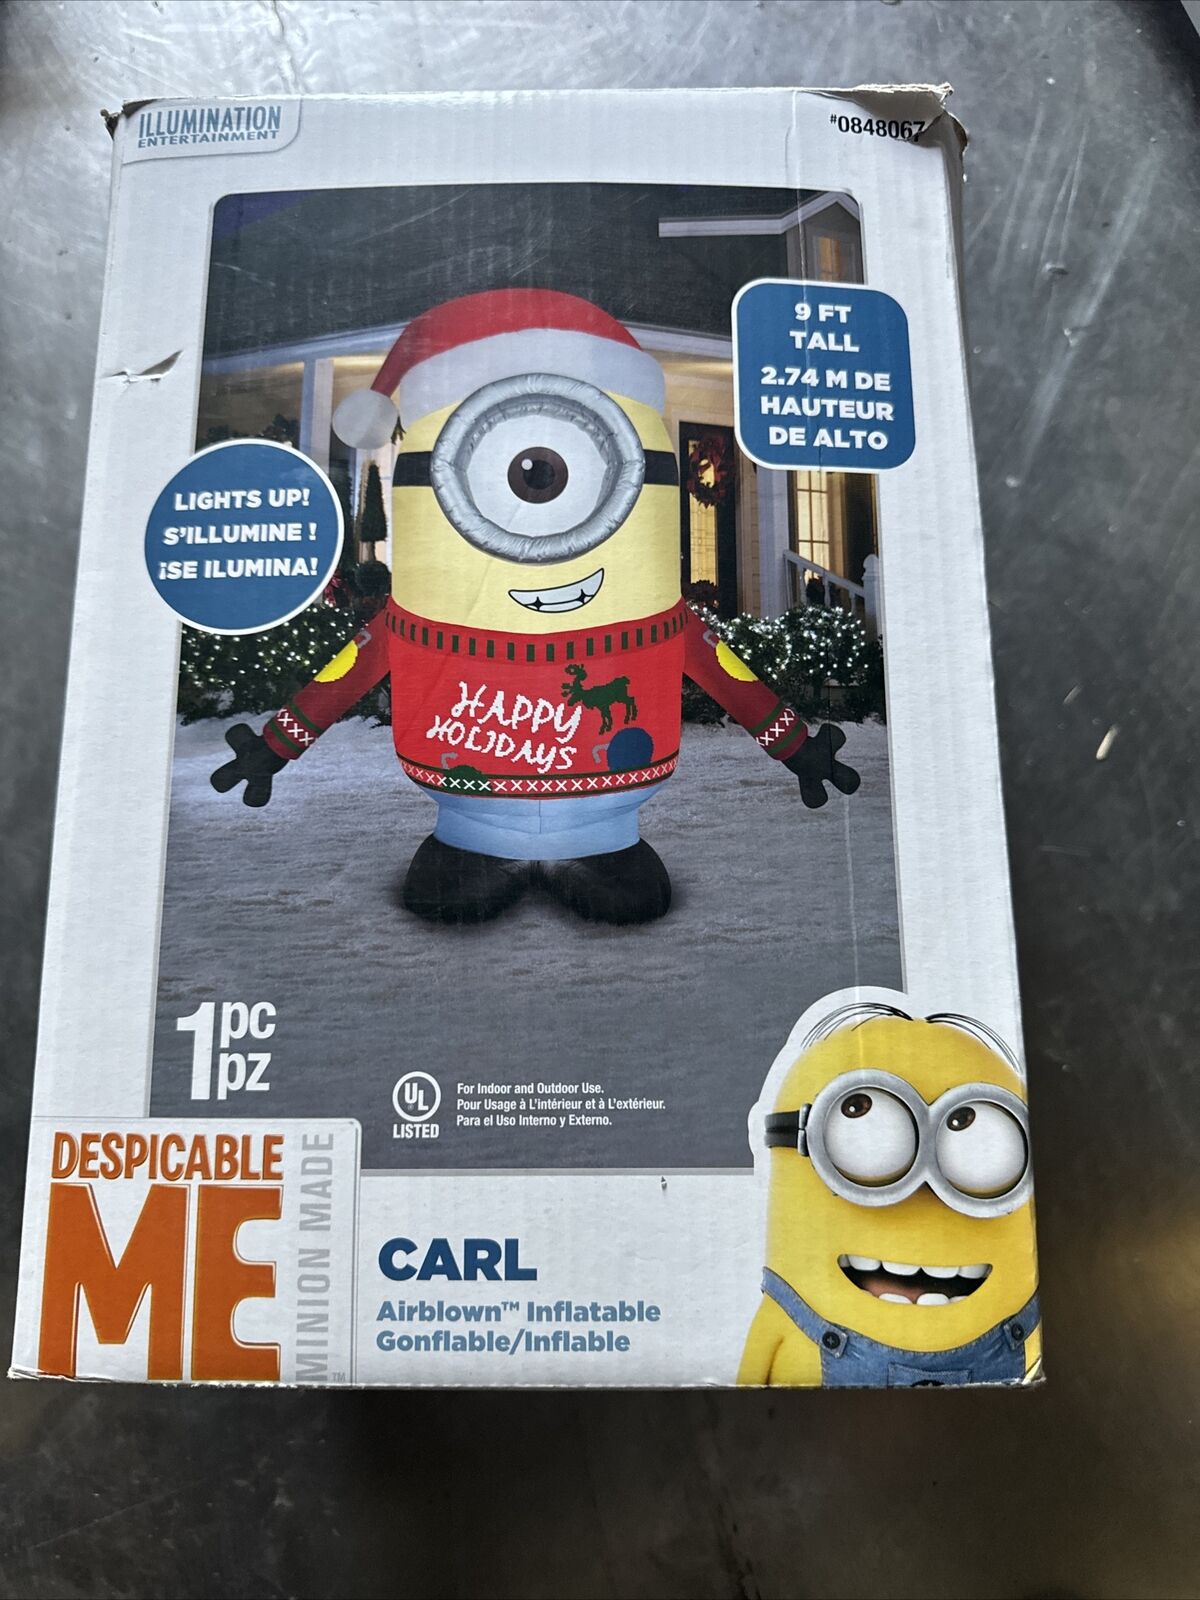 Gemmy 9’ft. Christmas Minion Carl Lighted Airblown Inflatable Despicable Me